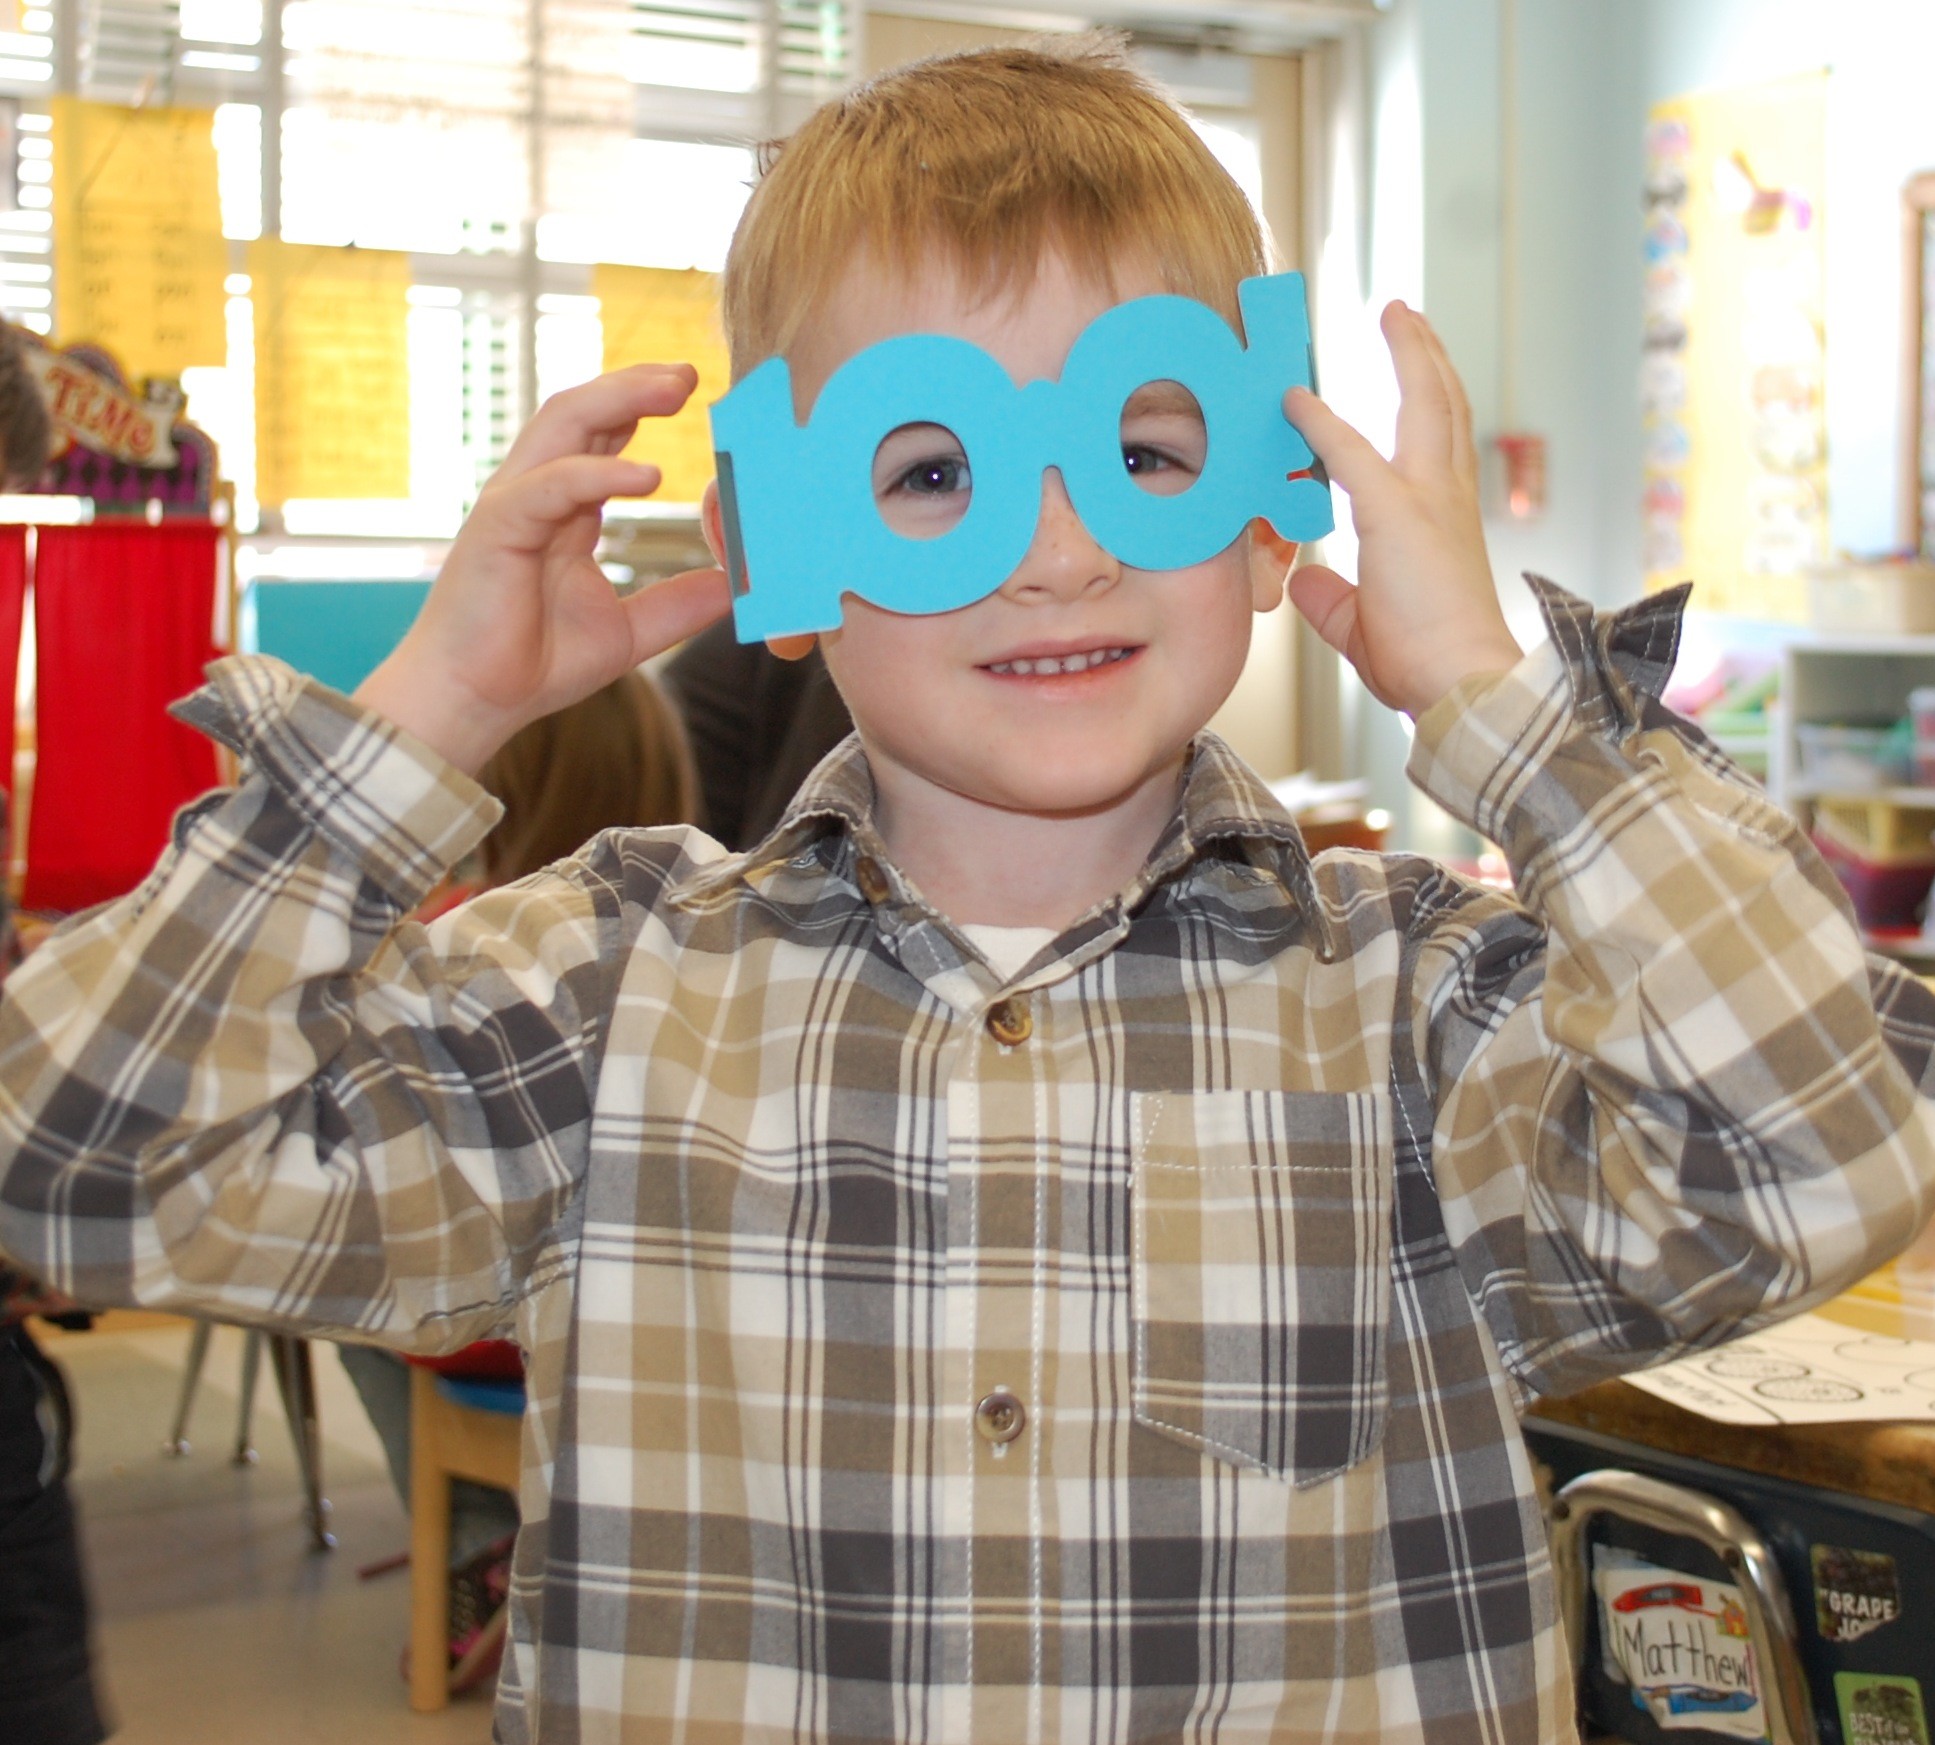 Nicholas Weber, a kindergartner at the Seaford Manor School, tried on special glasses last Friday to celebrate the 100th day of school.